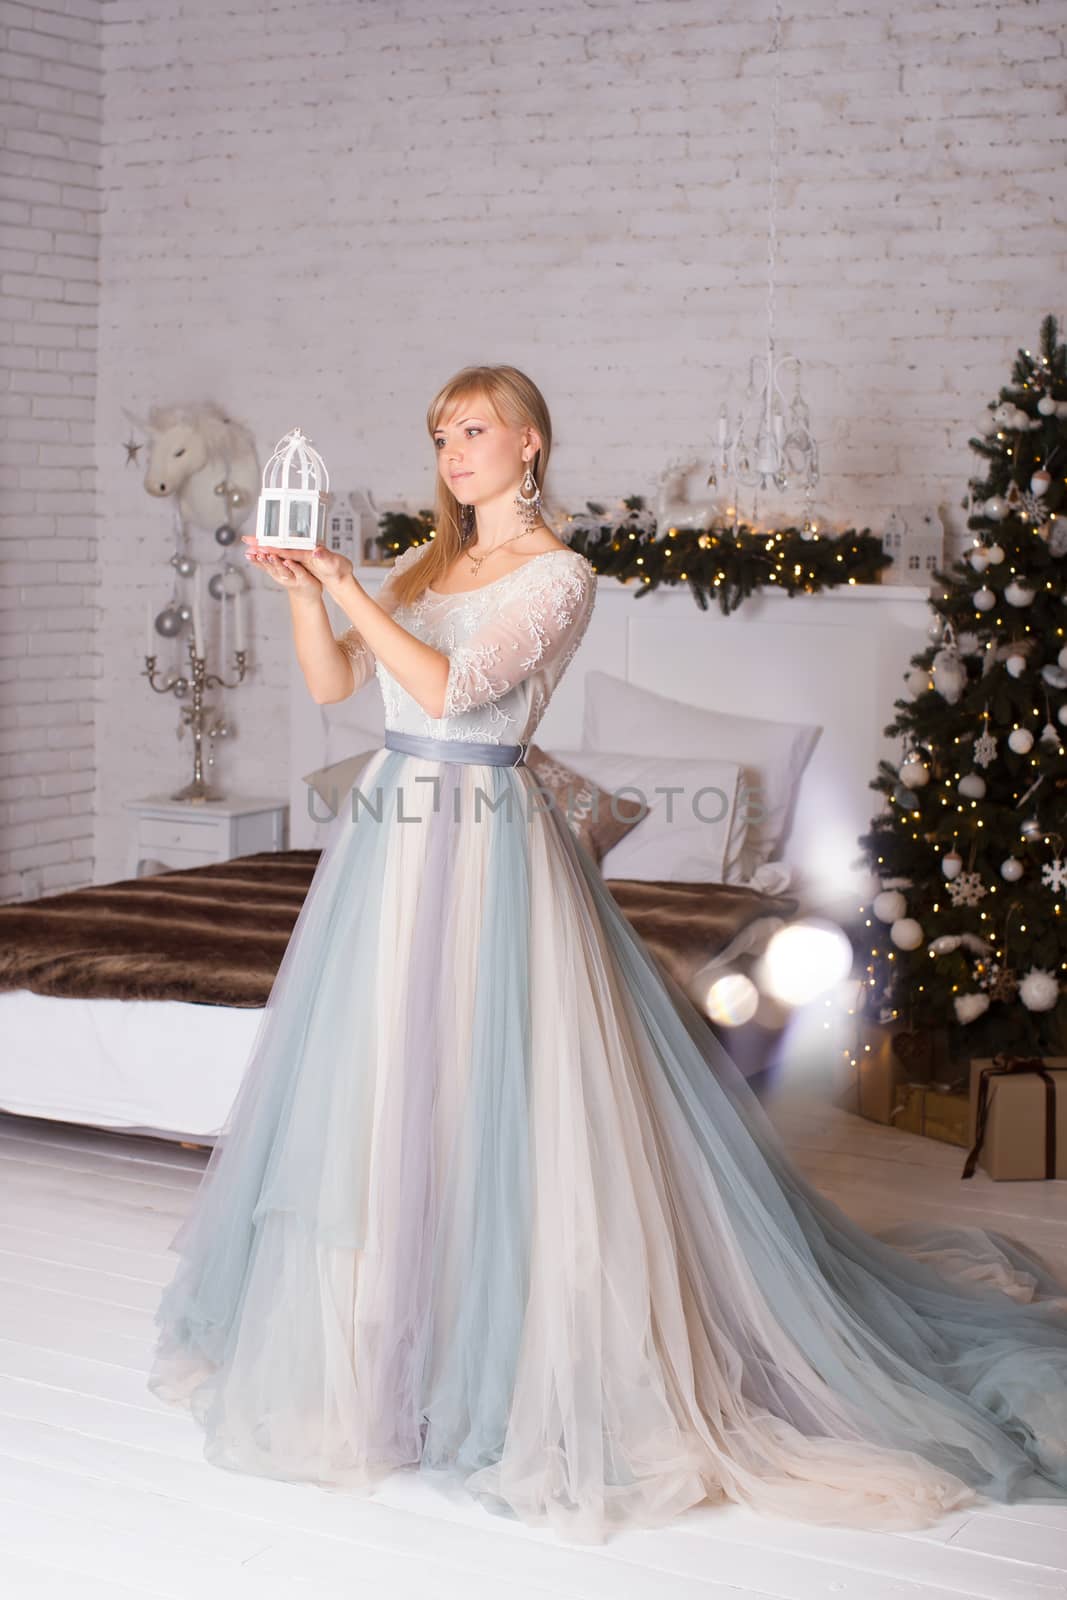 Girl in stylish dress holding a Christmas lantern in hand standing near trees